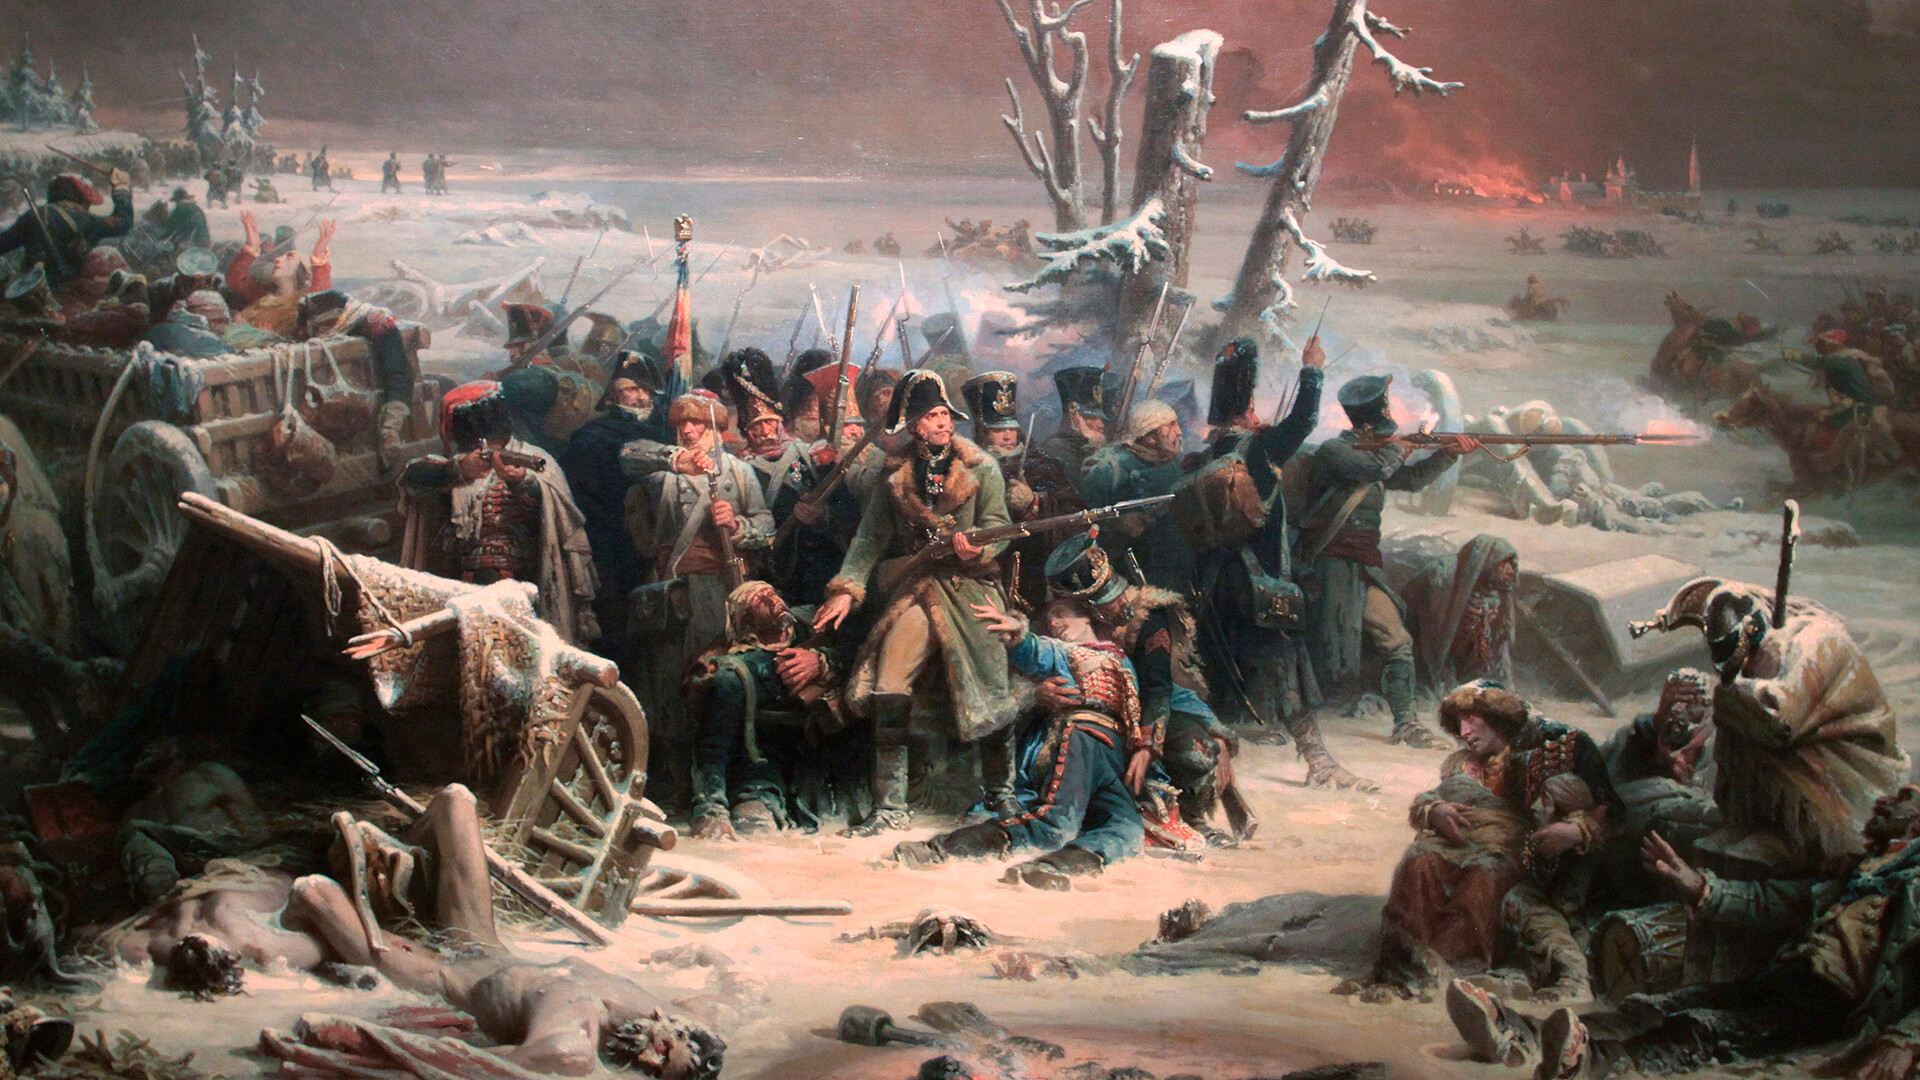 Marshal Ney supporting the rear guard during the retreat from Moscow.